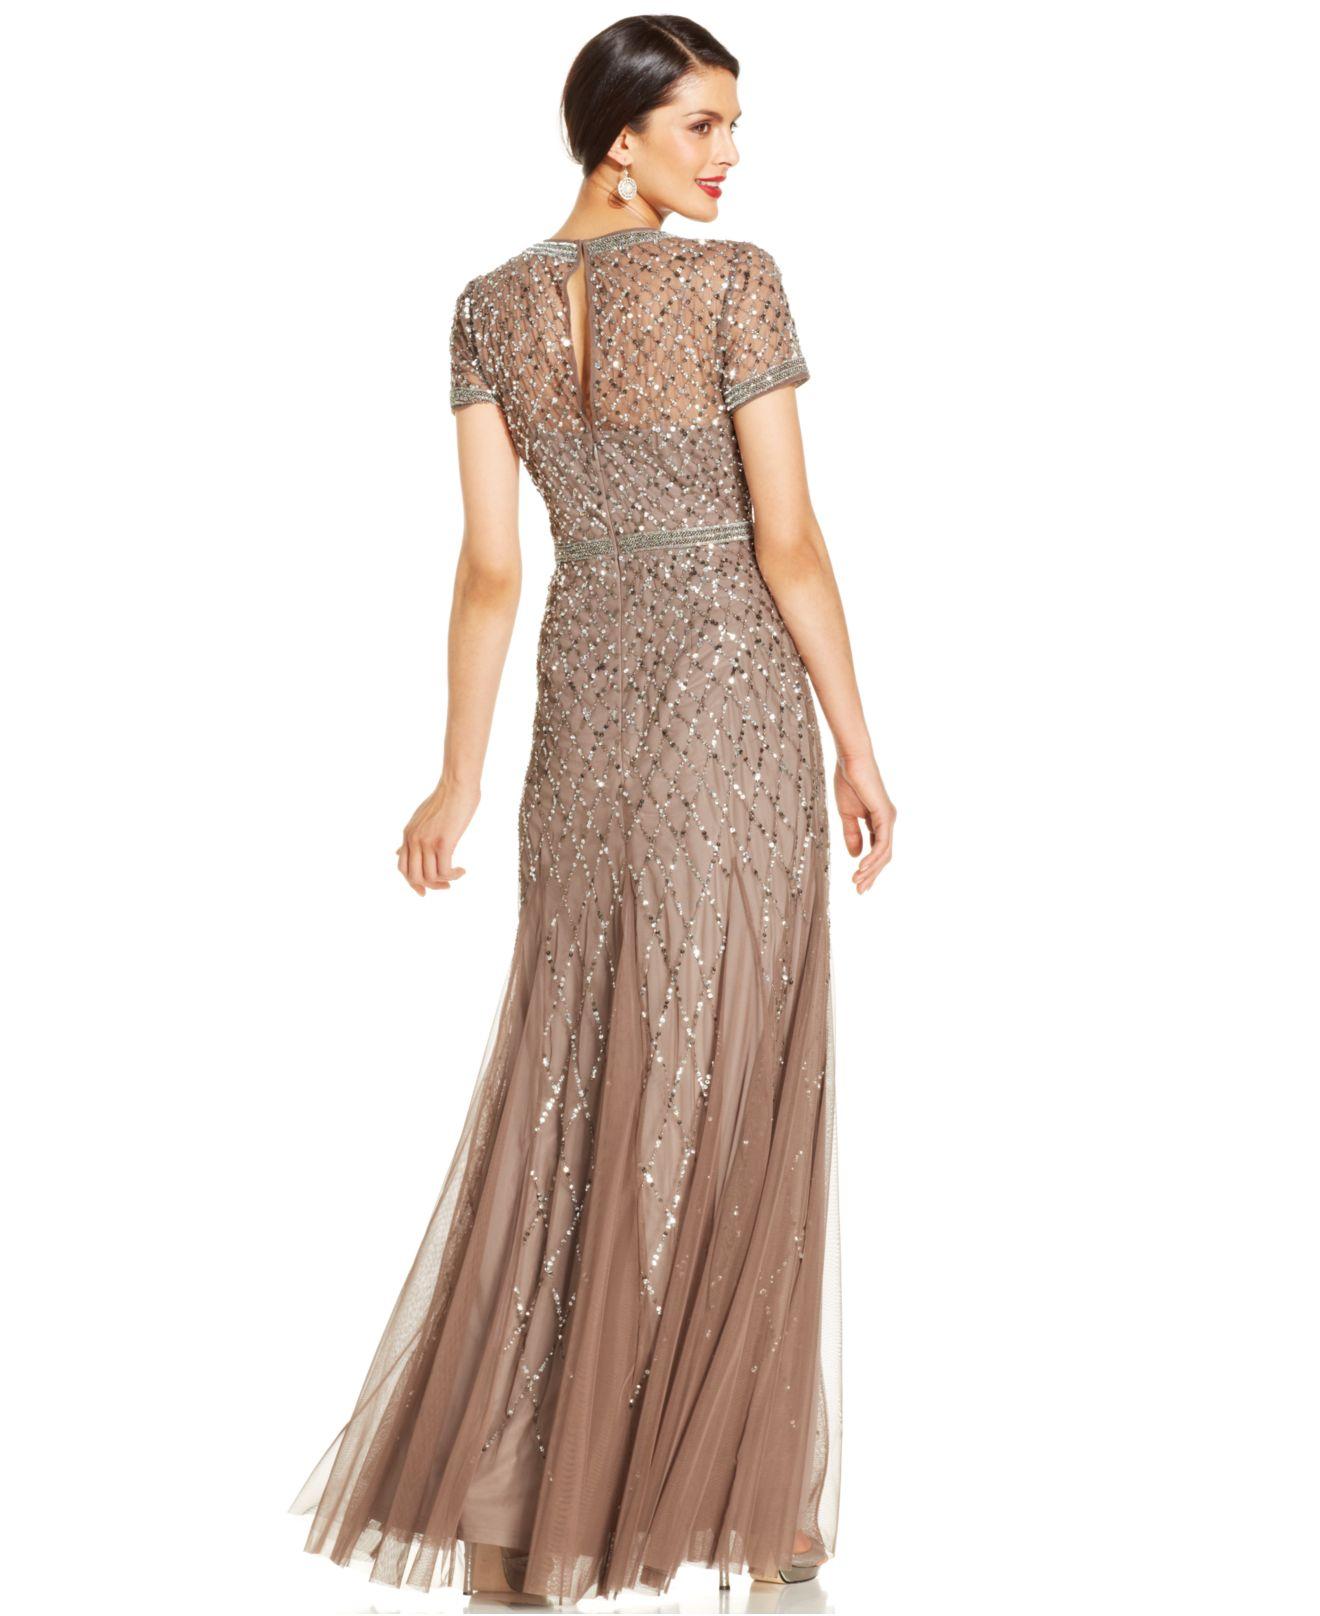 Lyst - Adrianna Papell Short-sleeve Embellished Pleated Gown in Brown